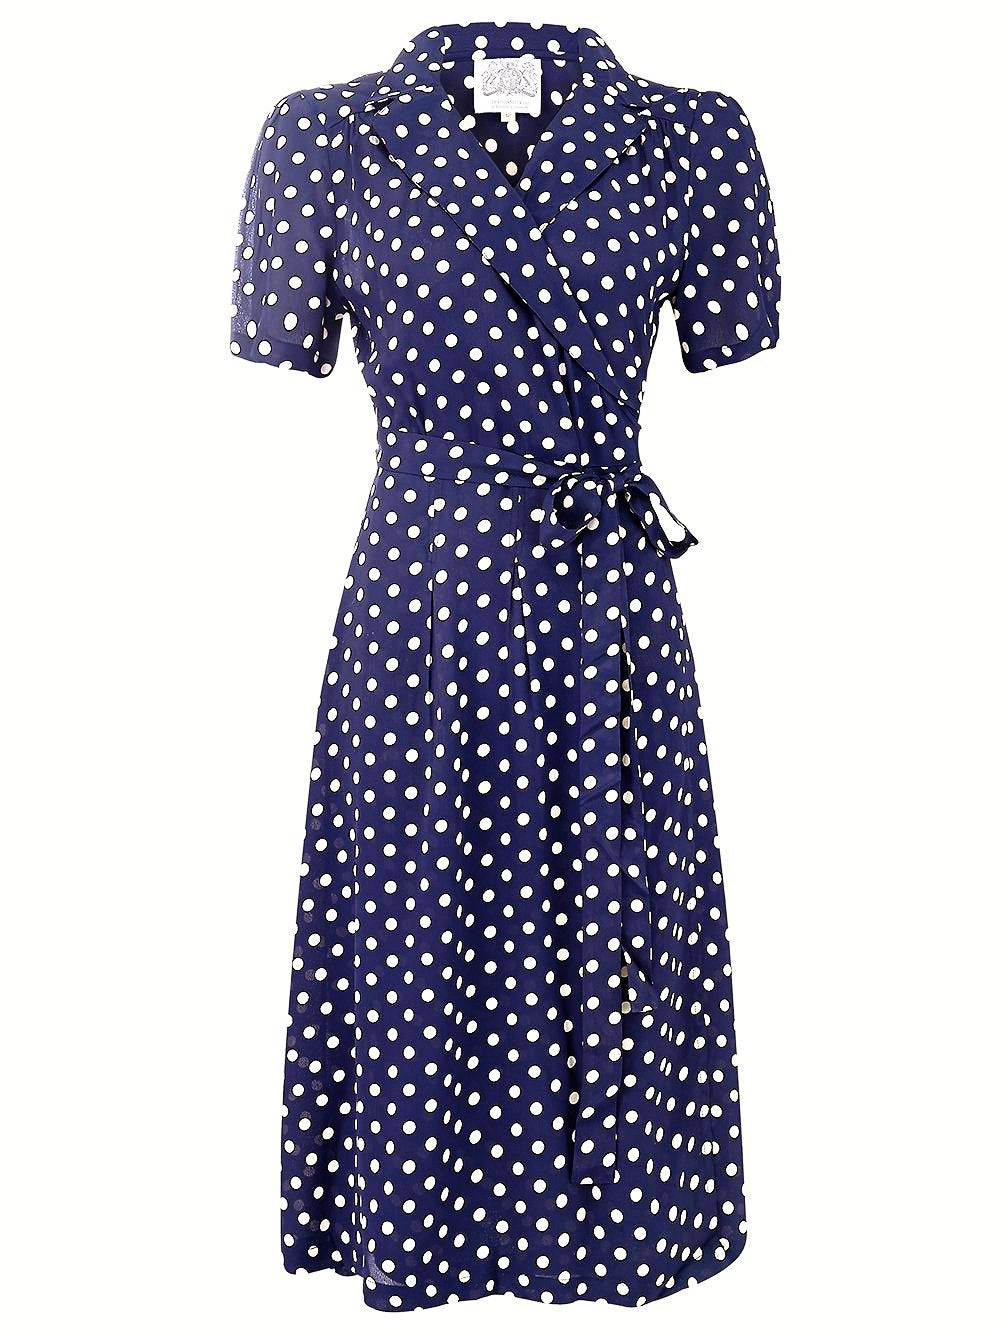 "Peggy" Wrap Dress in Navy with Polka Dot Spot, Classic The 1940s Vintage Inspired Style - CC41, Goodwood Revival, Twinwood Festival, Viva Las Vegas Rockabilly Weekend Rock n Romance The Seamstress of Bloomsbury